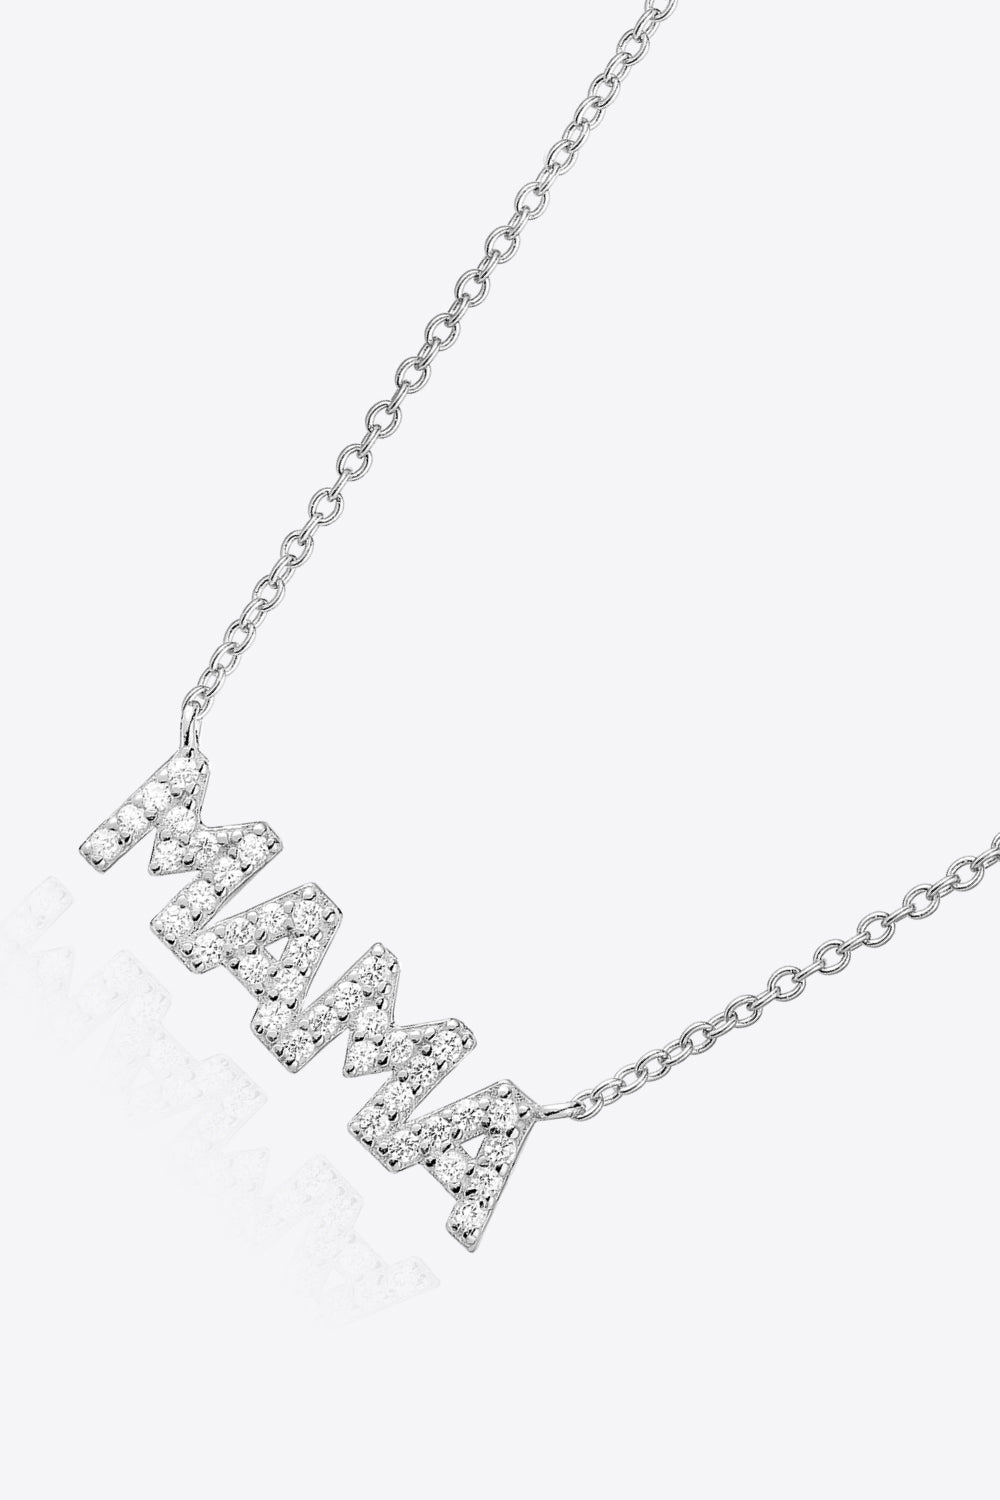 Silver Word Necklace | Silver Love Word Necklace | MAMA Necklace – KookyTwo